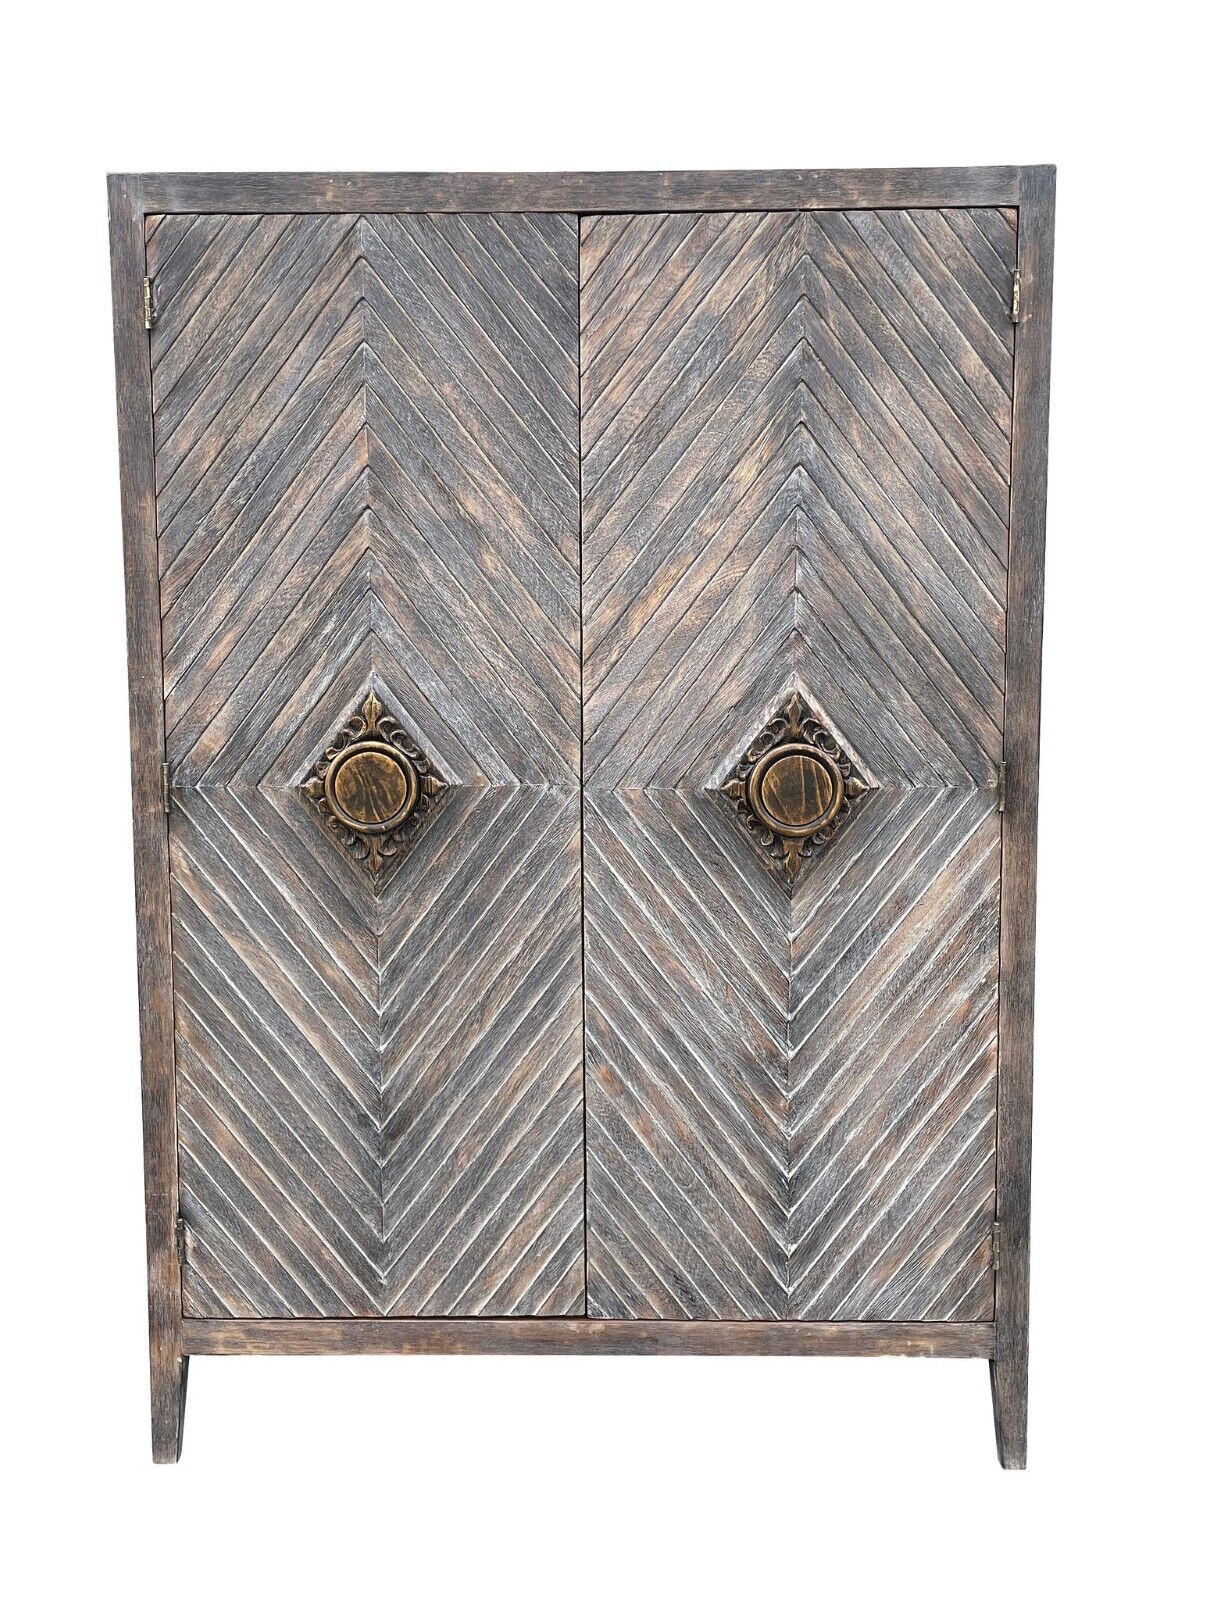 Esofastore Milan Wooden Armoire, Unique Hand Crafted Chevron Patterned Doors, Bedroom Cloth Organizer, Wardrobe Cabinet, Gray Rustic Finish